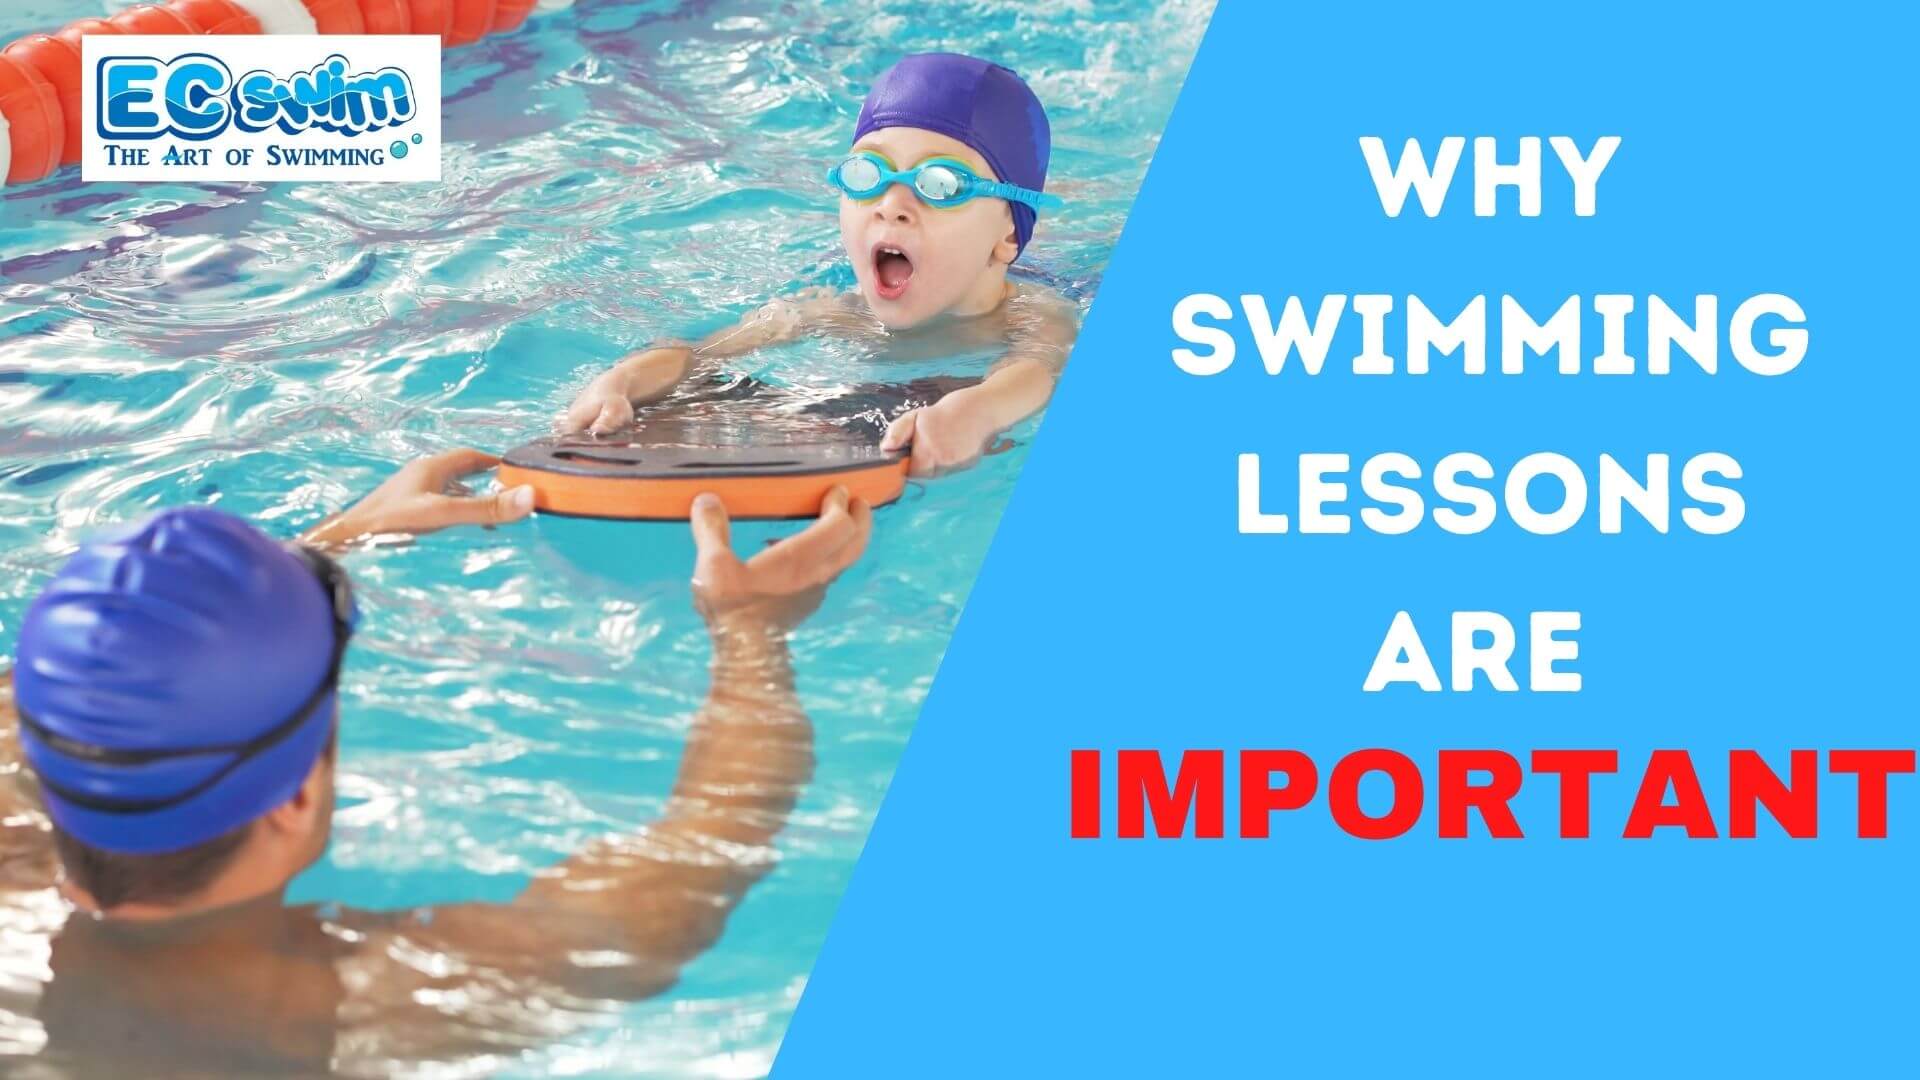 Why Swimming Lessons Are Important